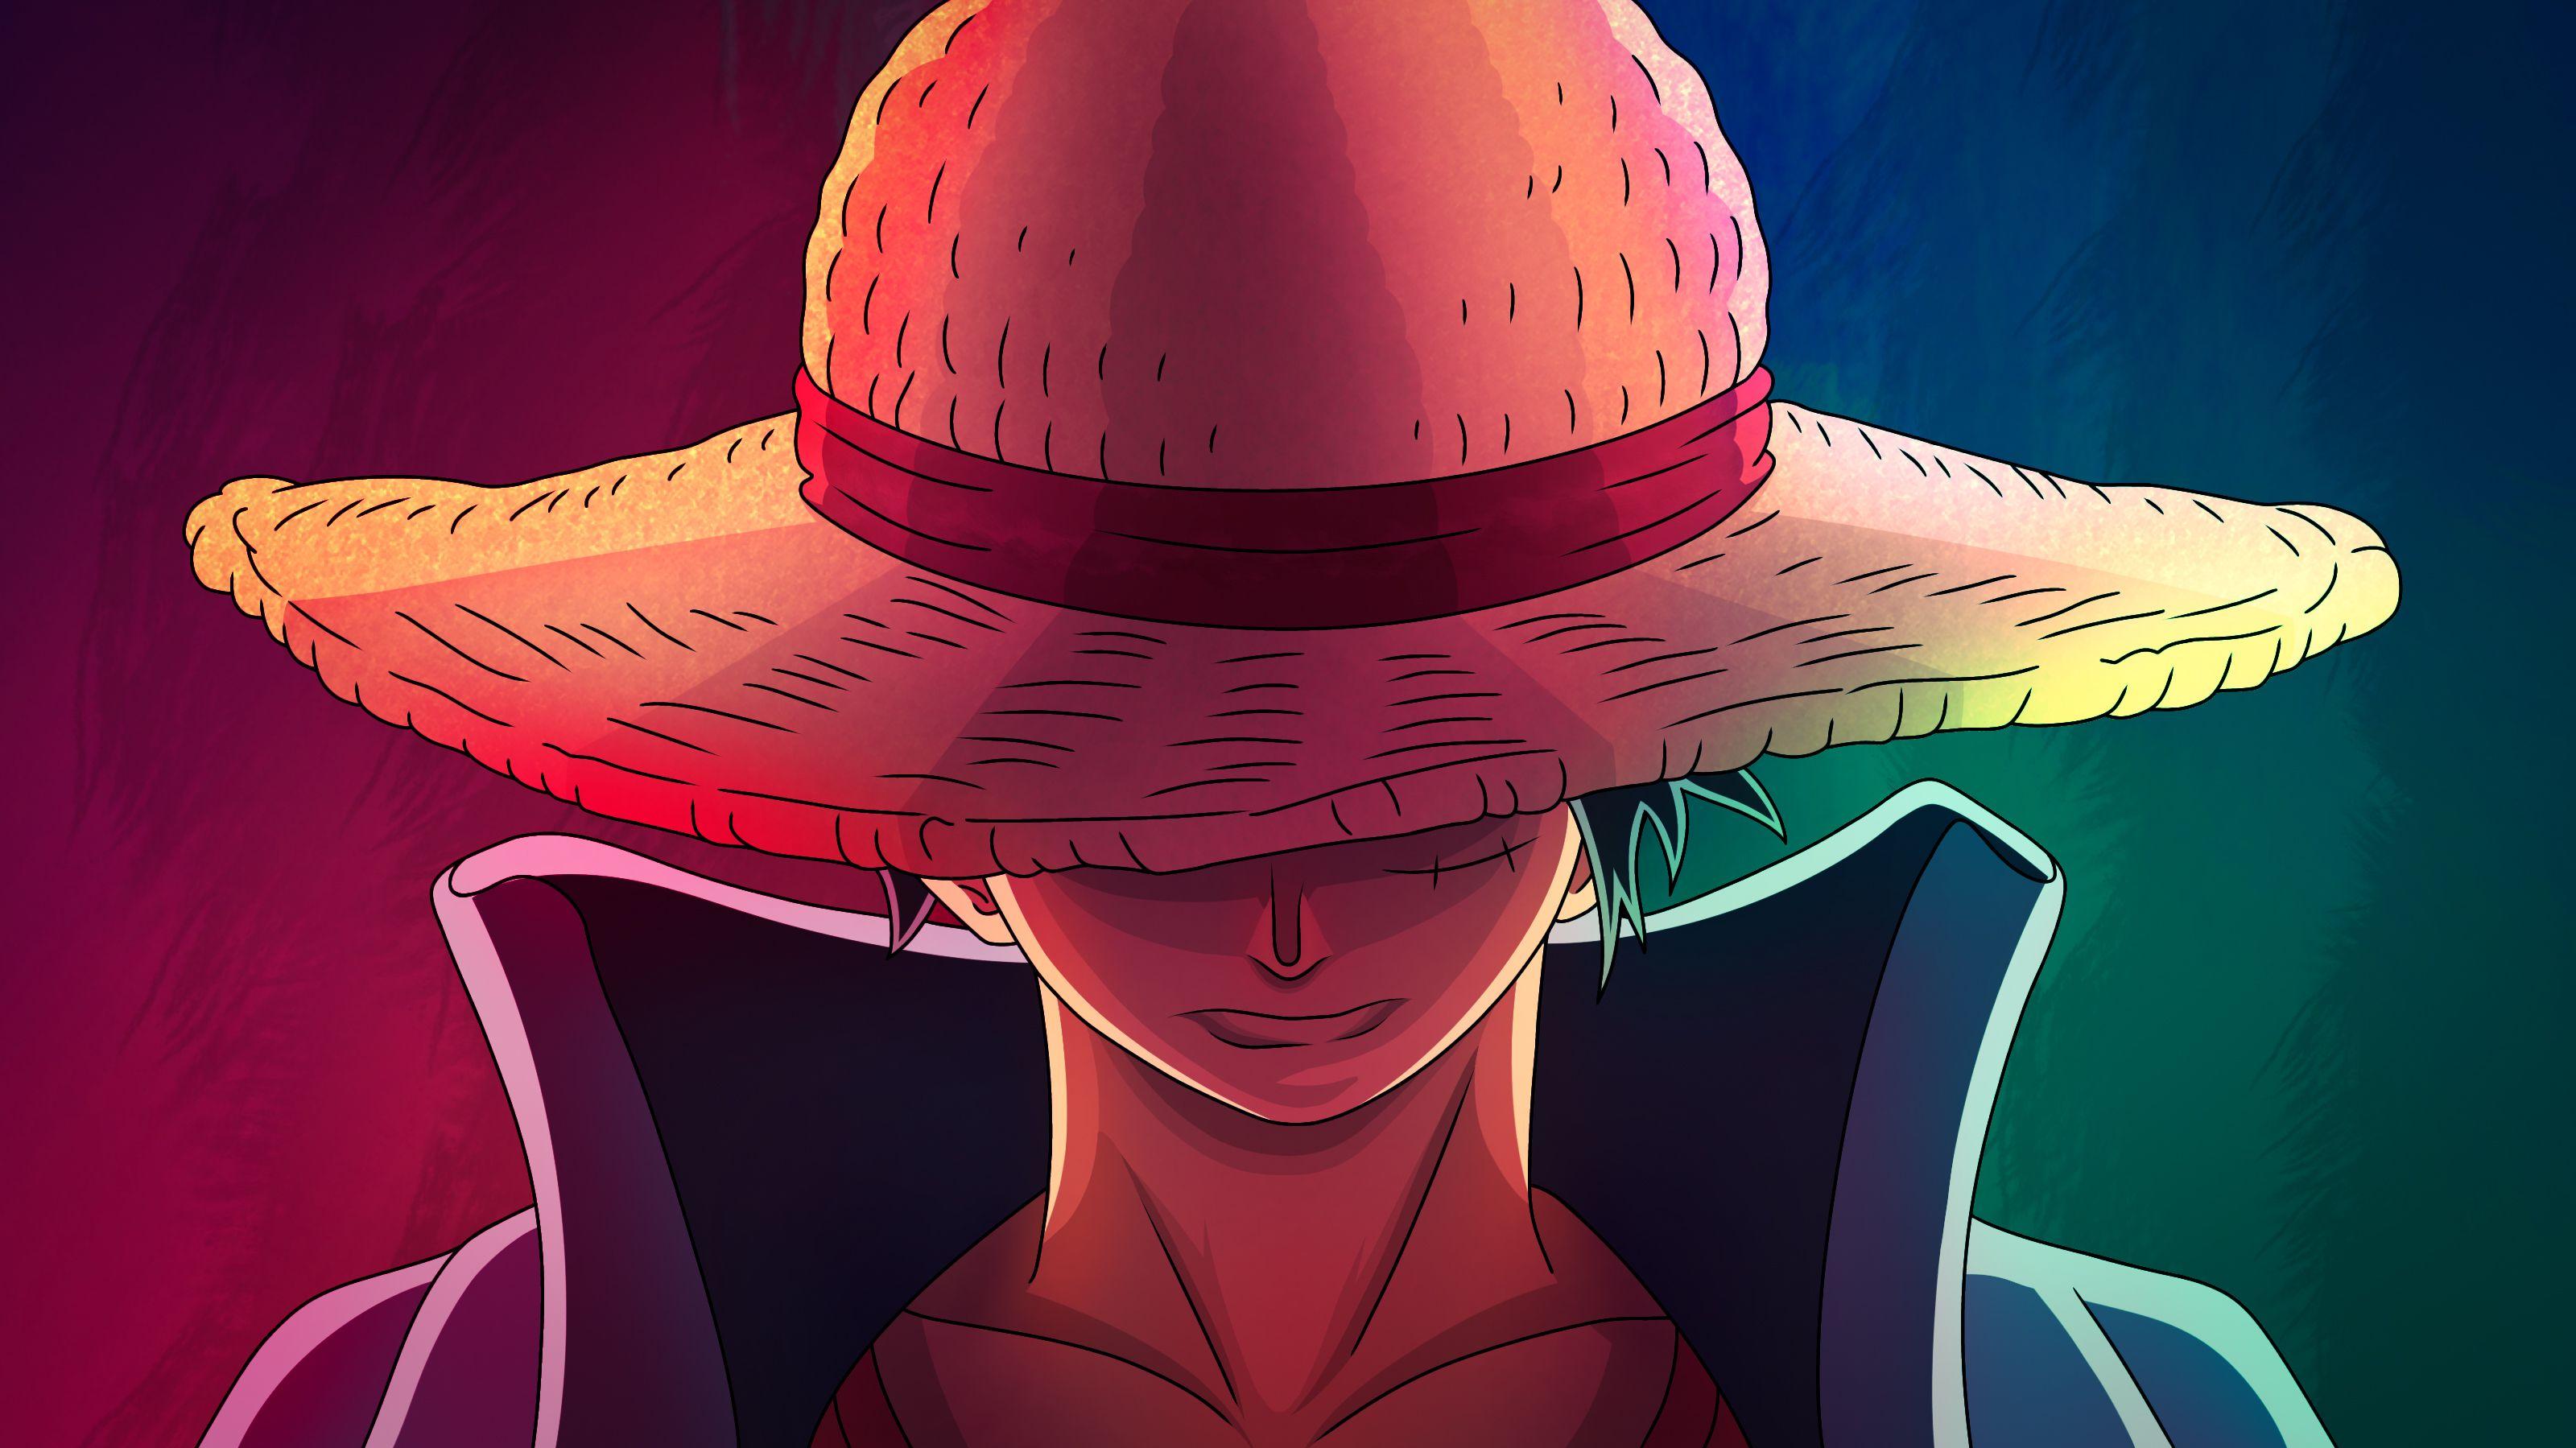 One Piece Luffy Wallpapers on